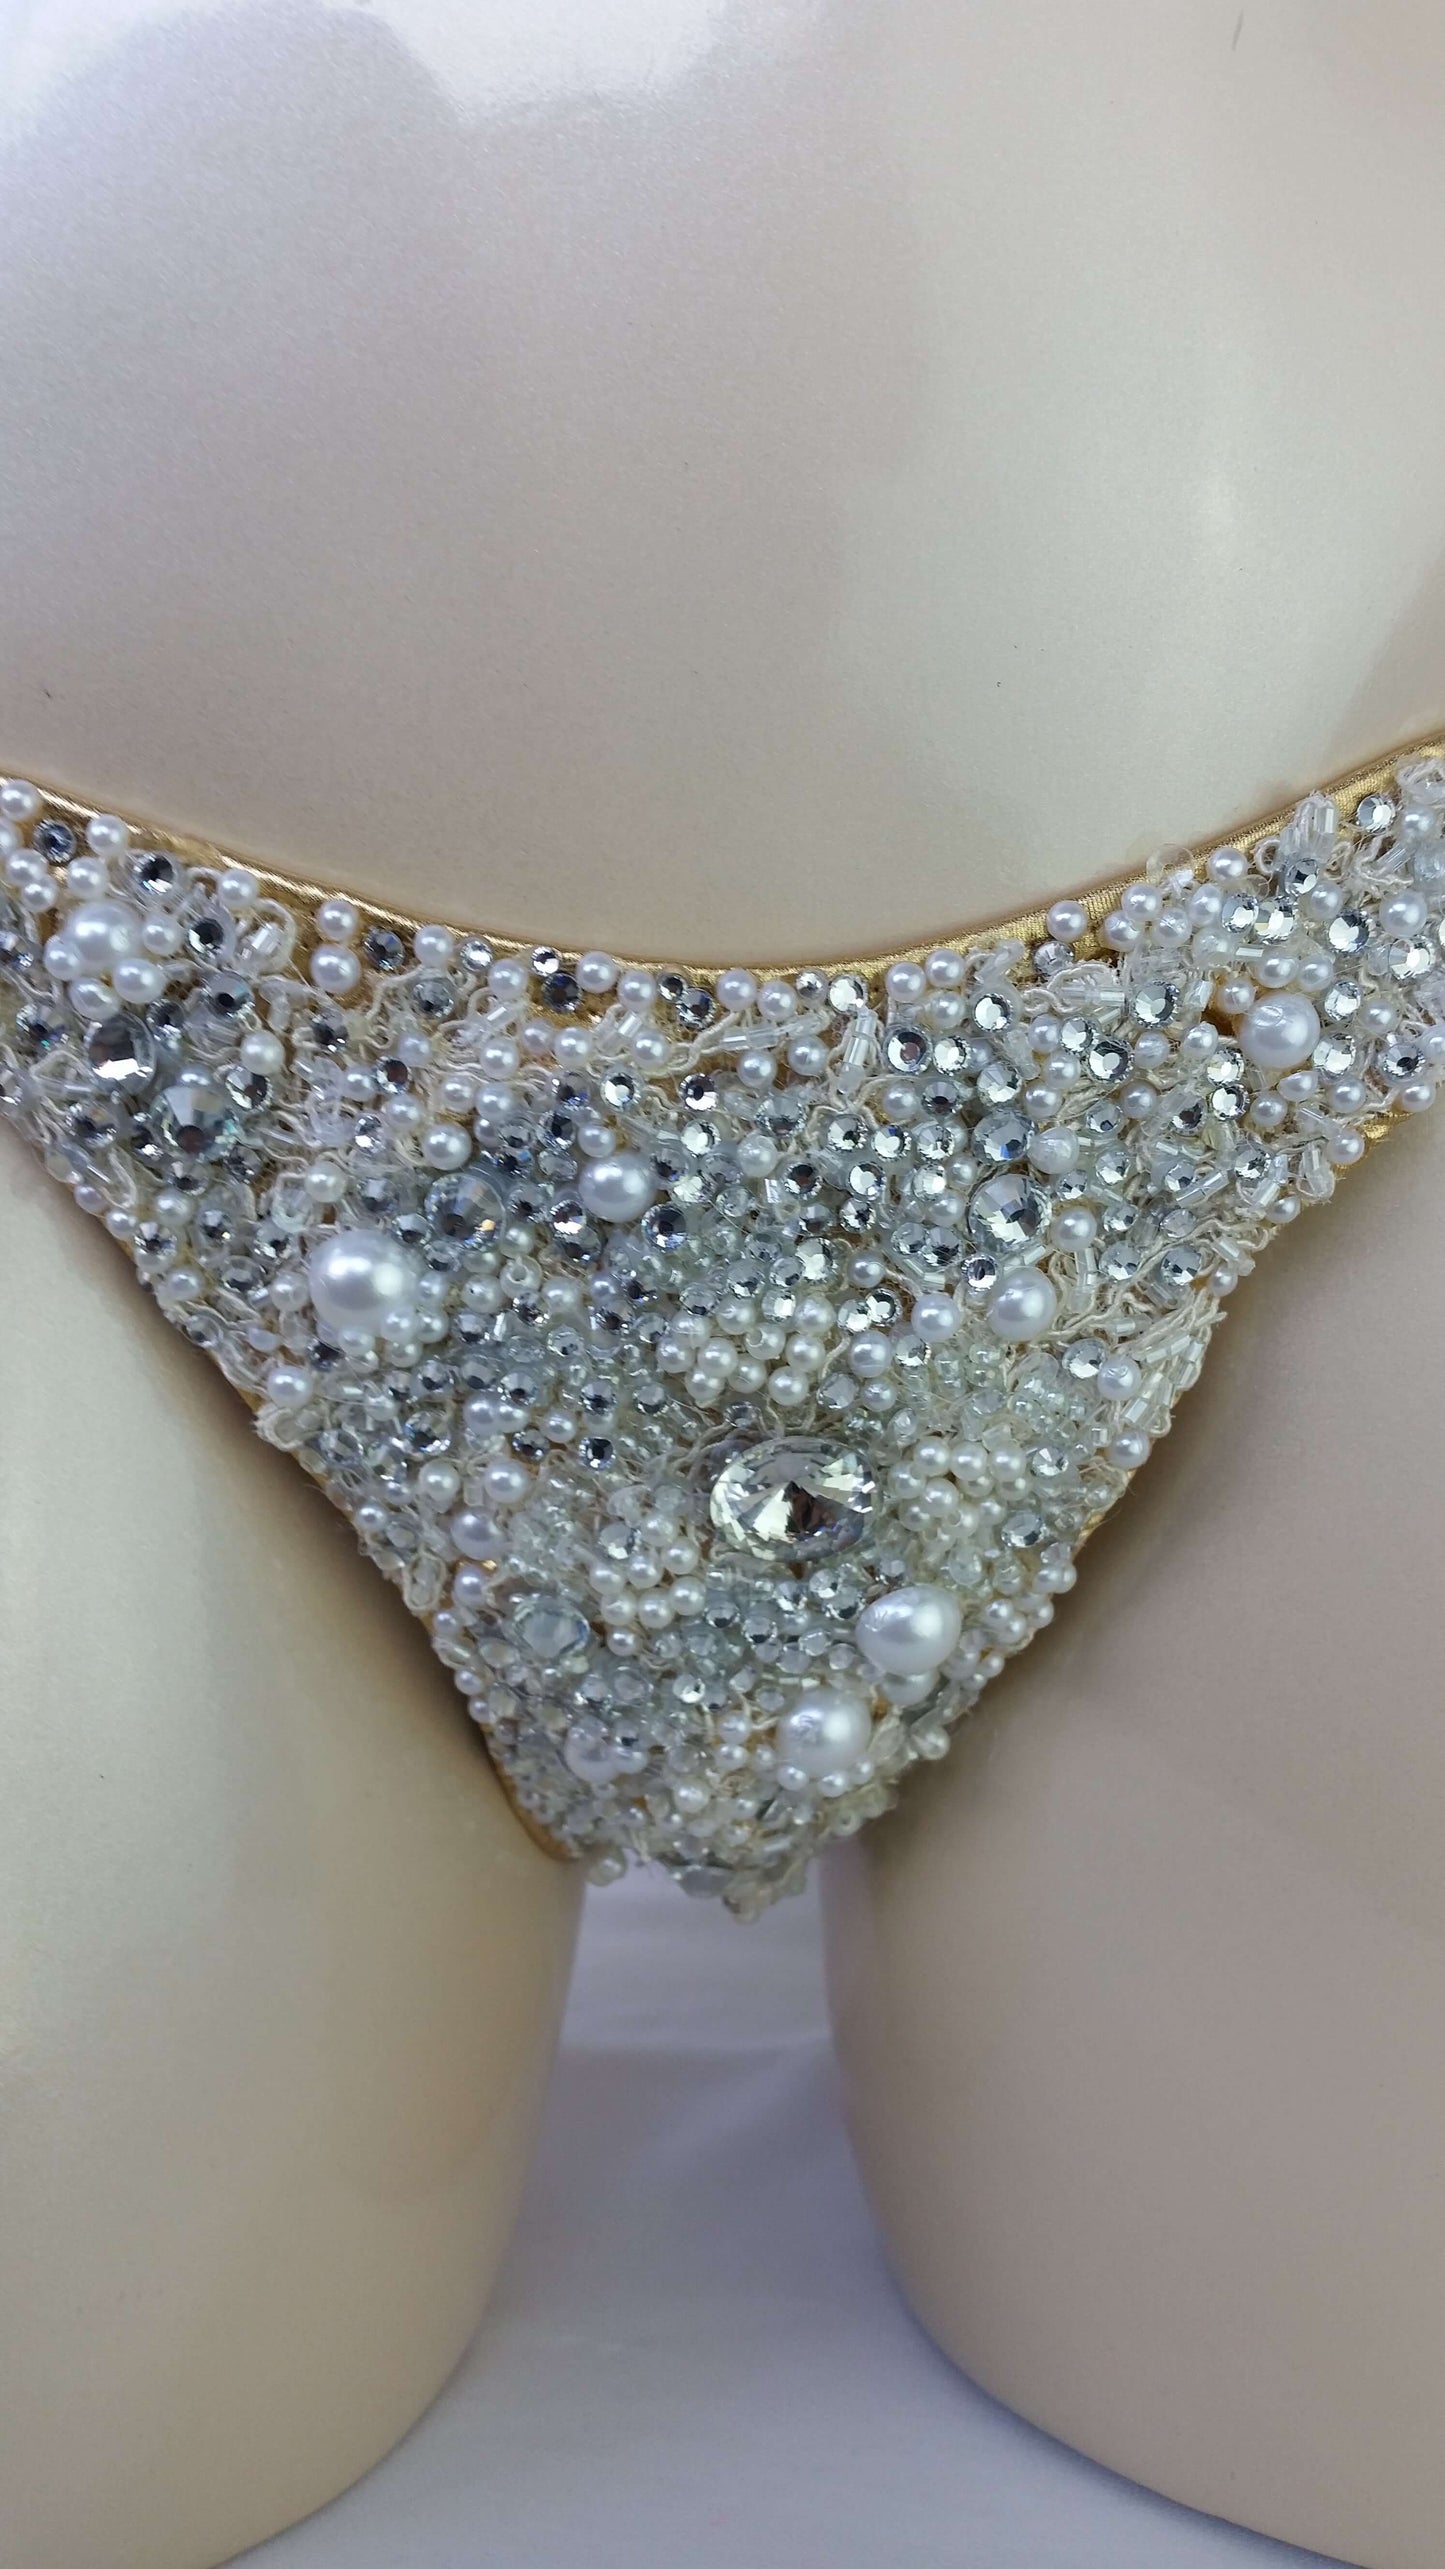 Gold bikini with wedding wateredlace fully encrusted with Crystal